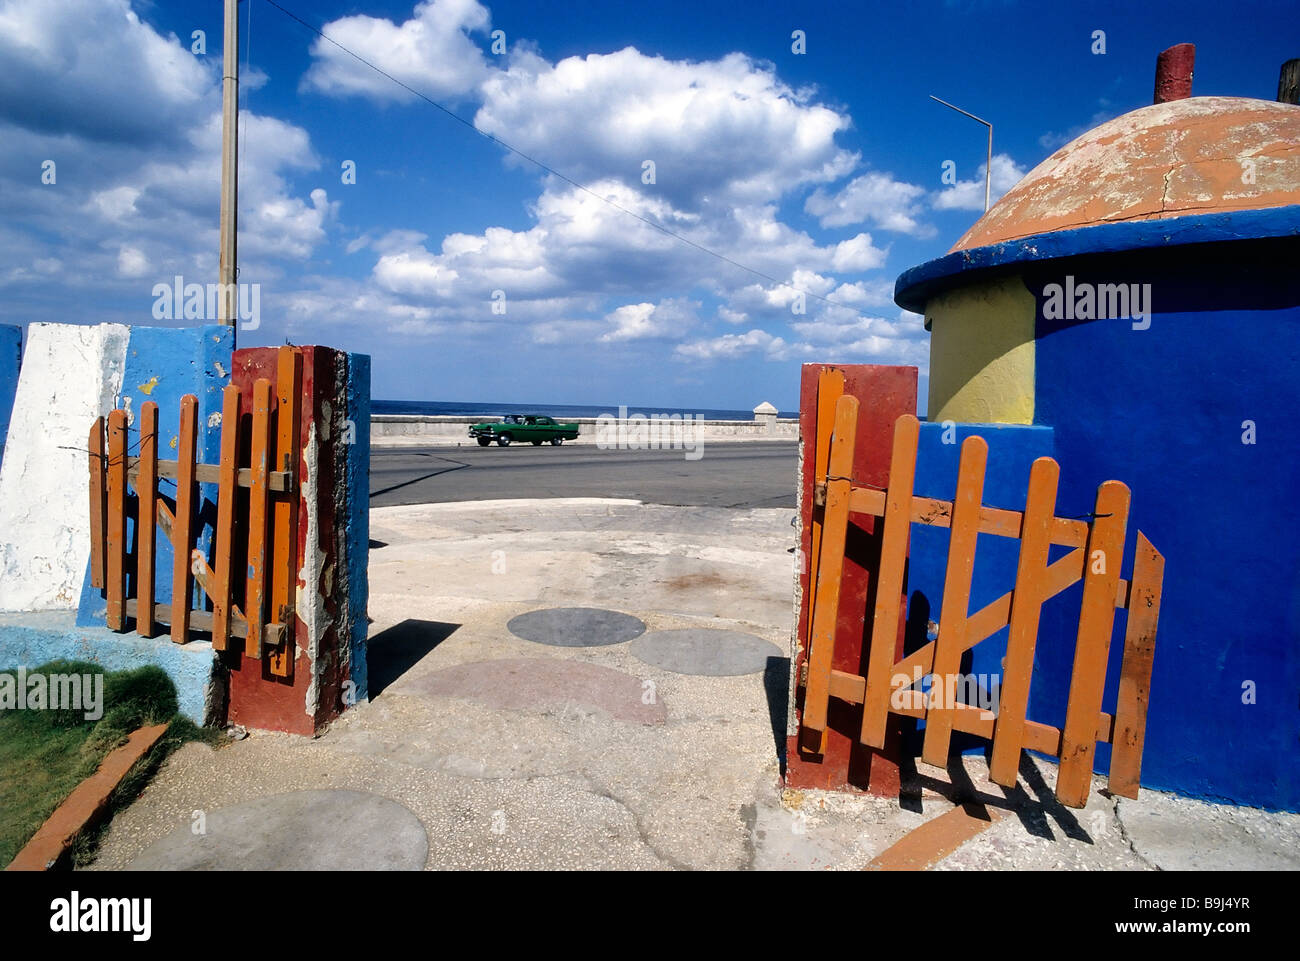 View of the coast road, from the entrance of a playground, coloured wooden fence, Malecon, Havana, Cuba, Caribbean Stock Photo